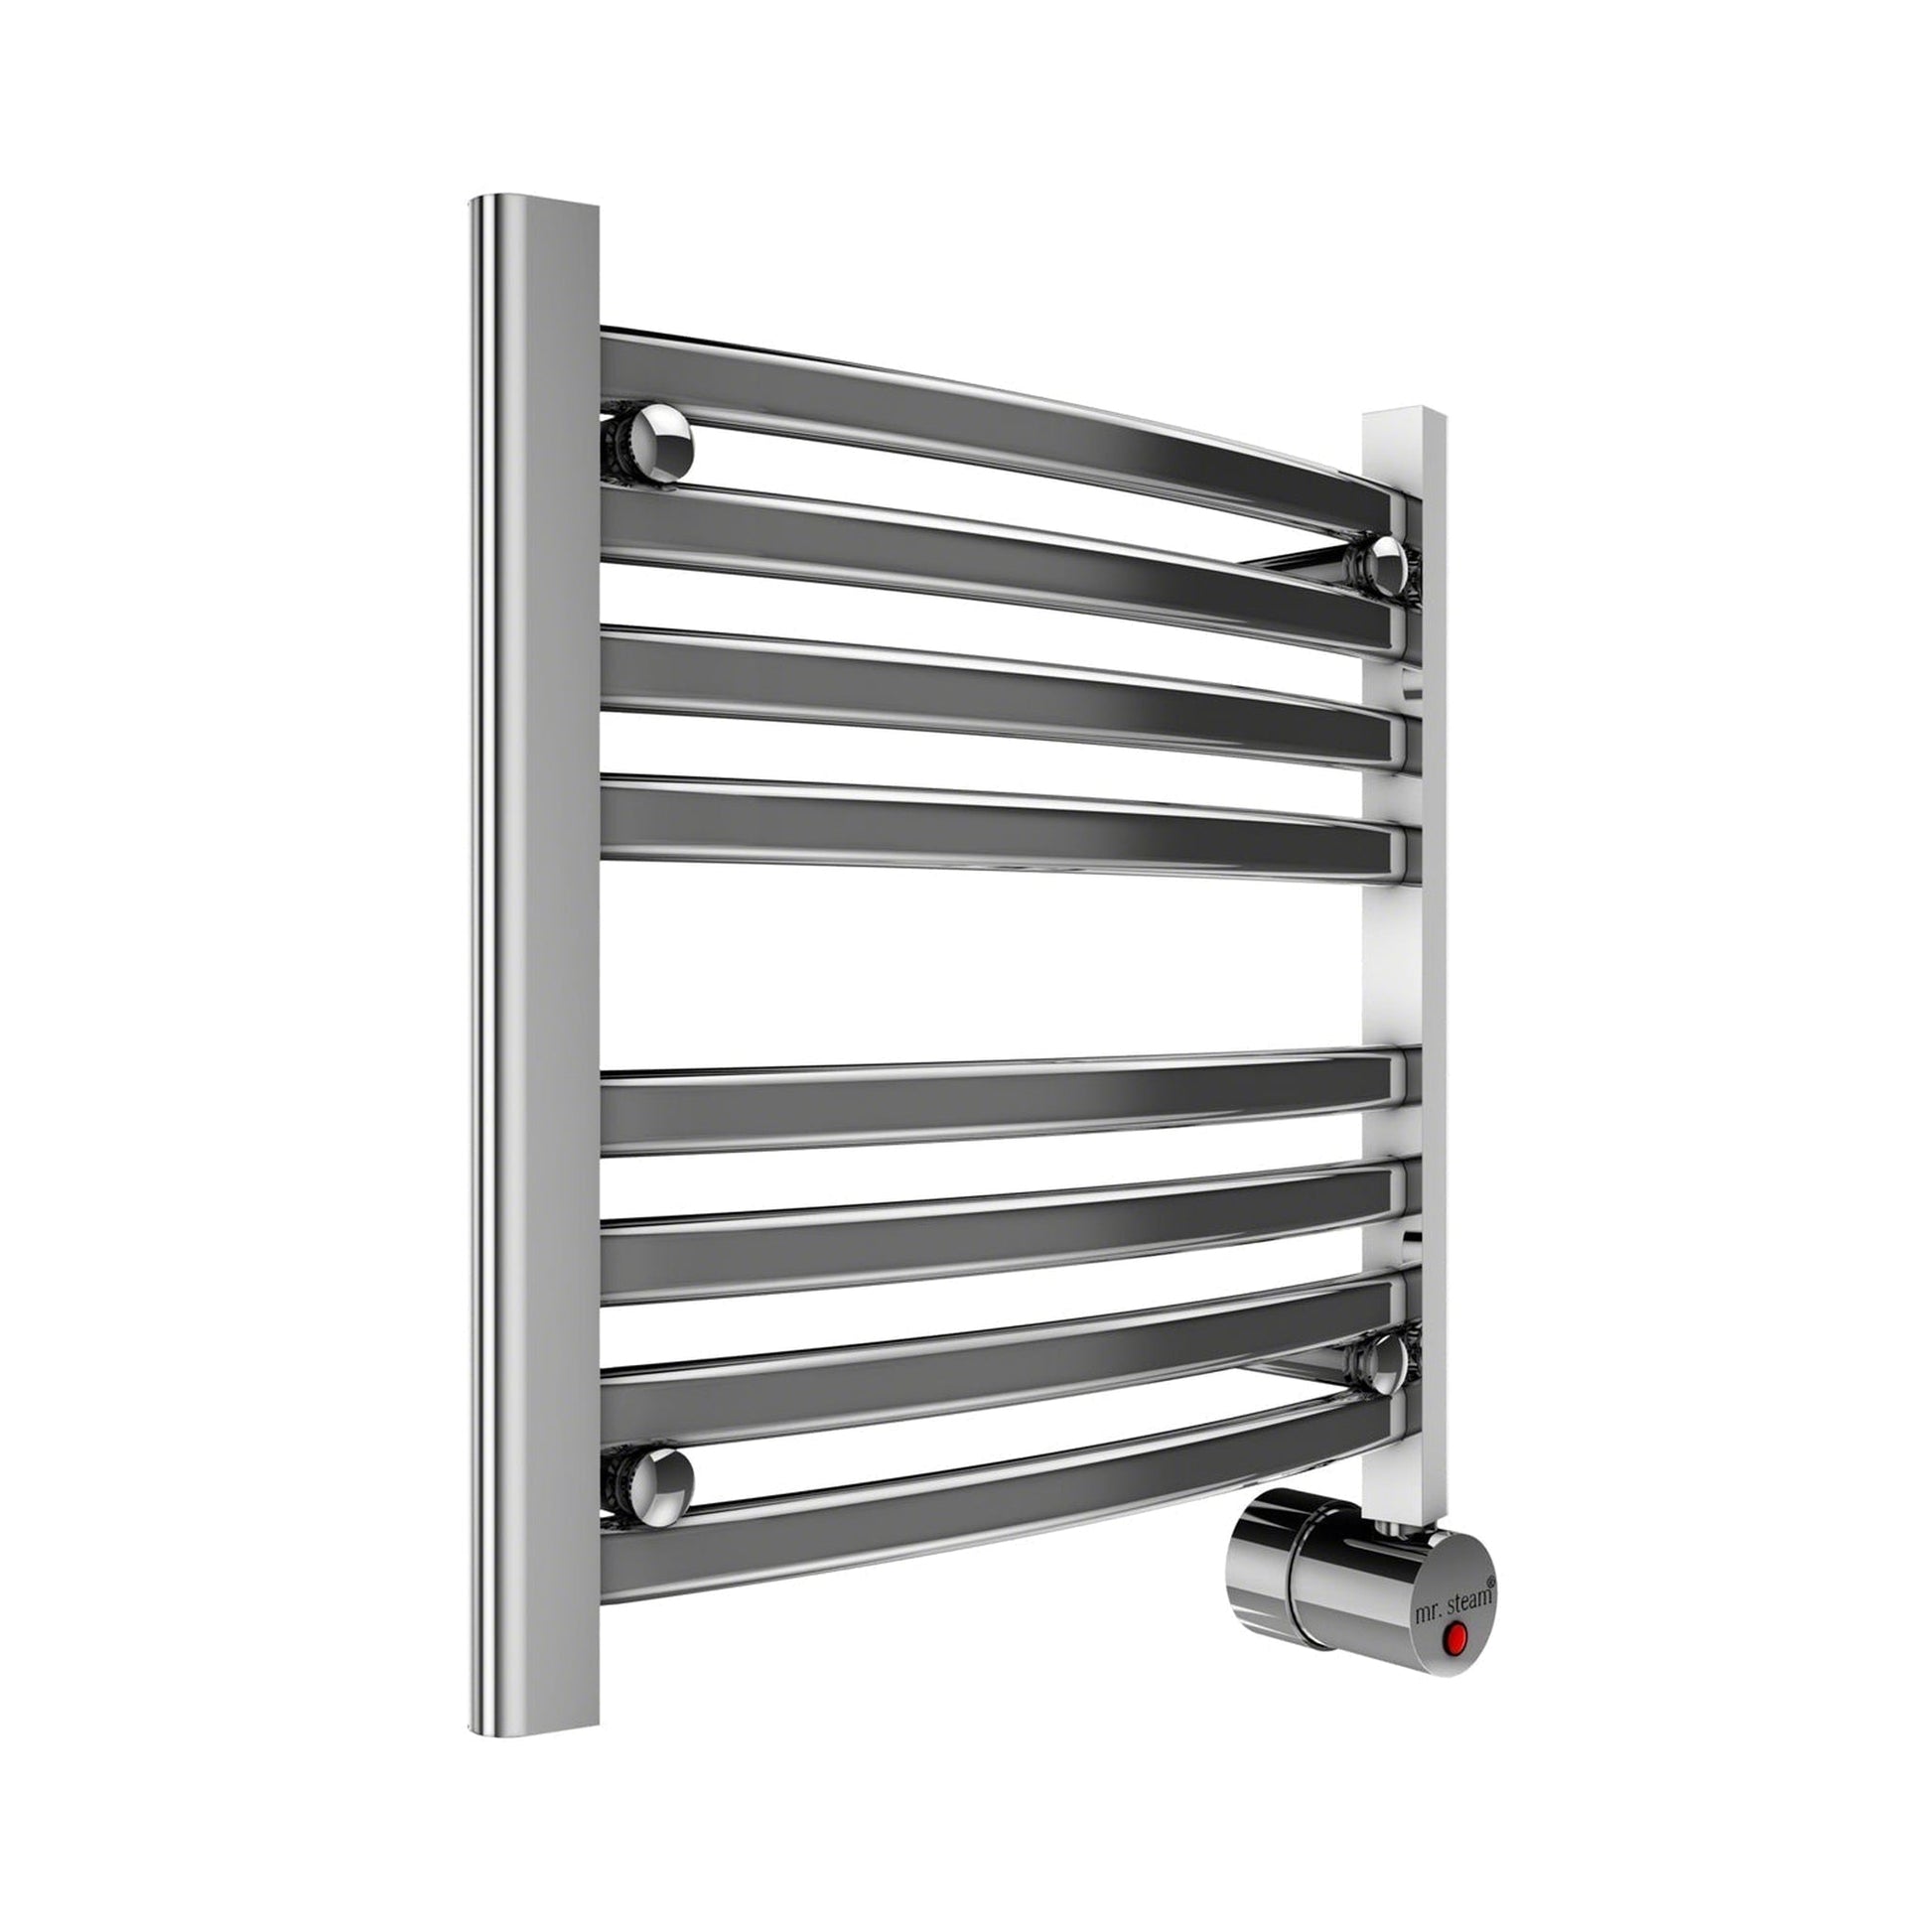 MrSteam Broadway Collection 20" x 20" 8-Bar Polished Chrome Hardwired Wall-Mounted Electric Towel Warmer With Digital Timer and Built-in Aromatherapy Oil Well